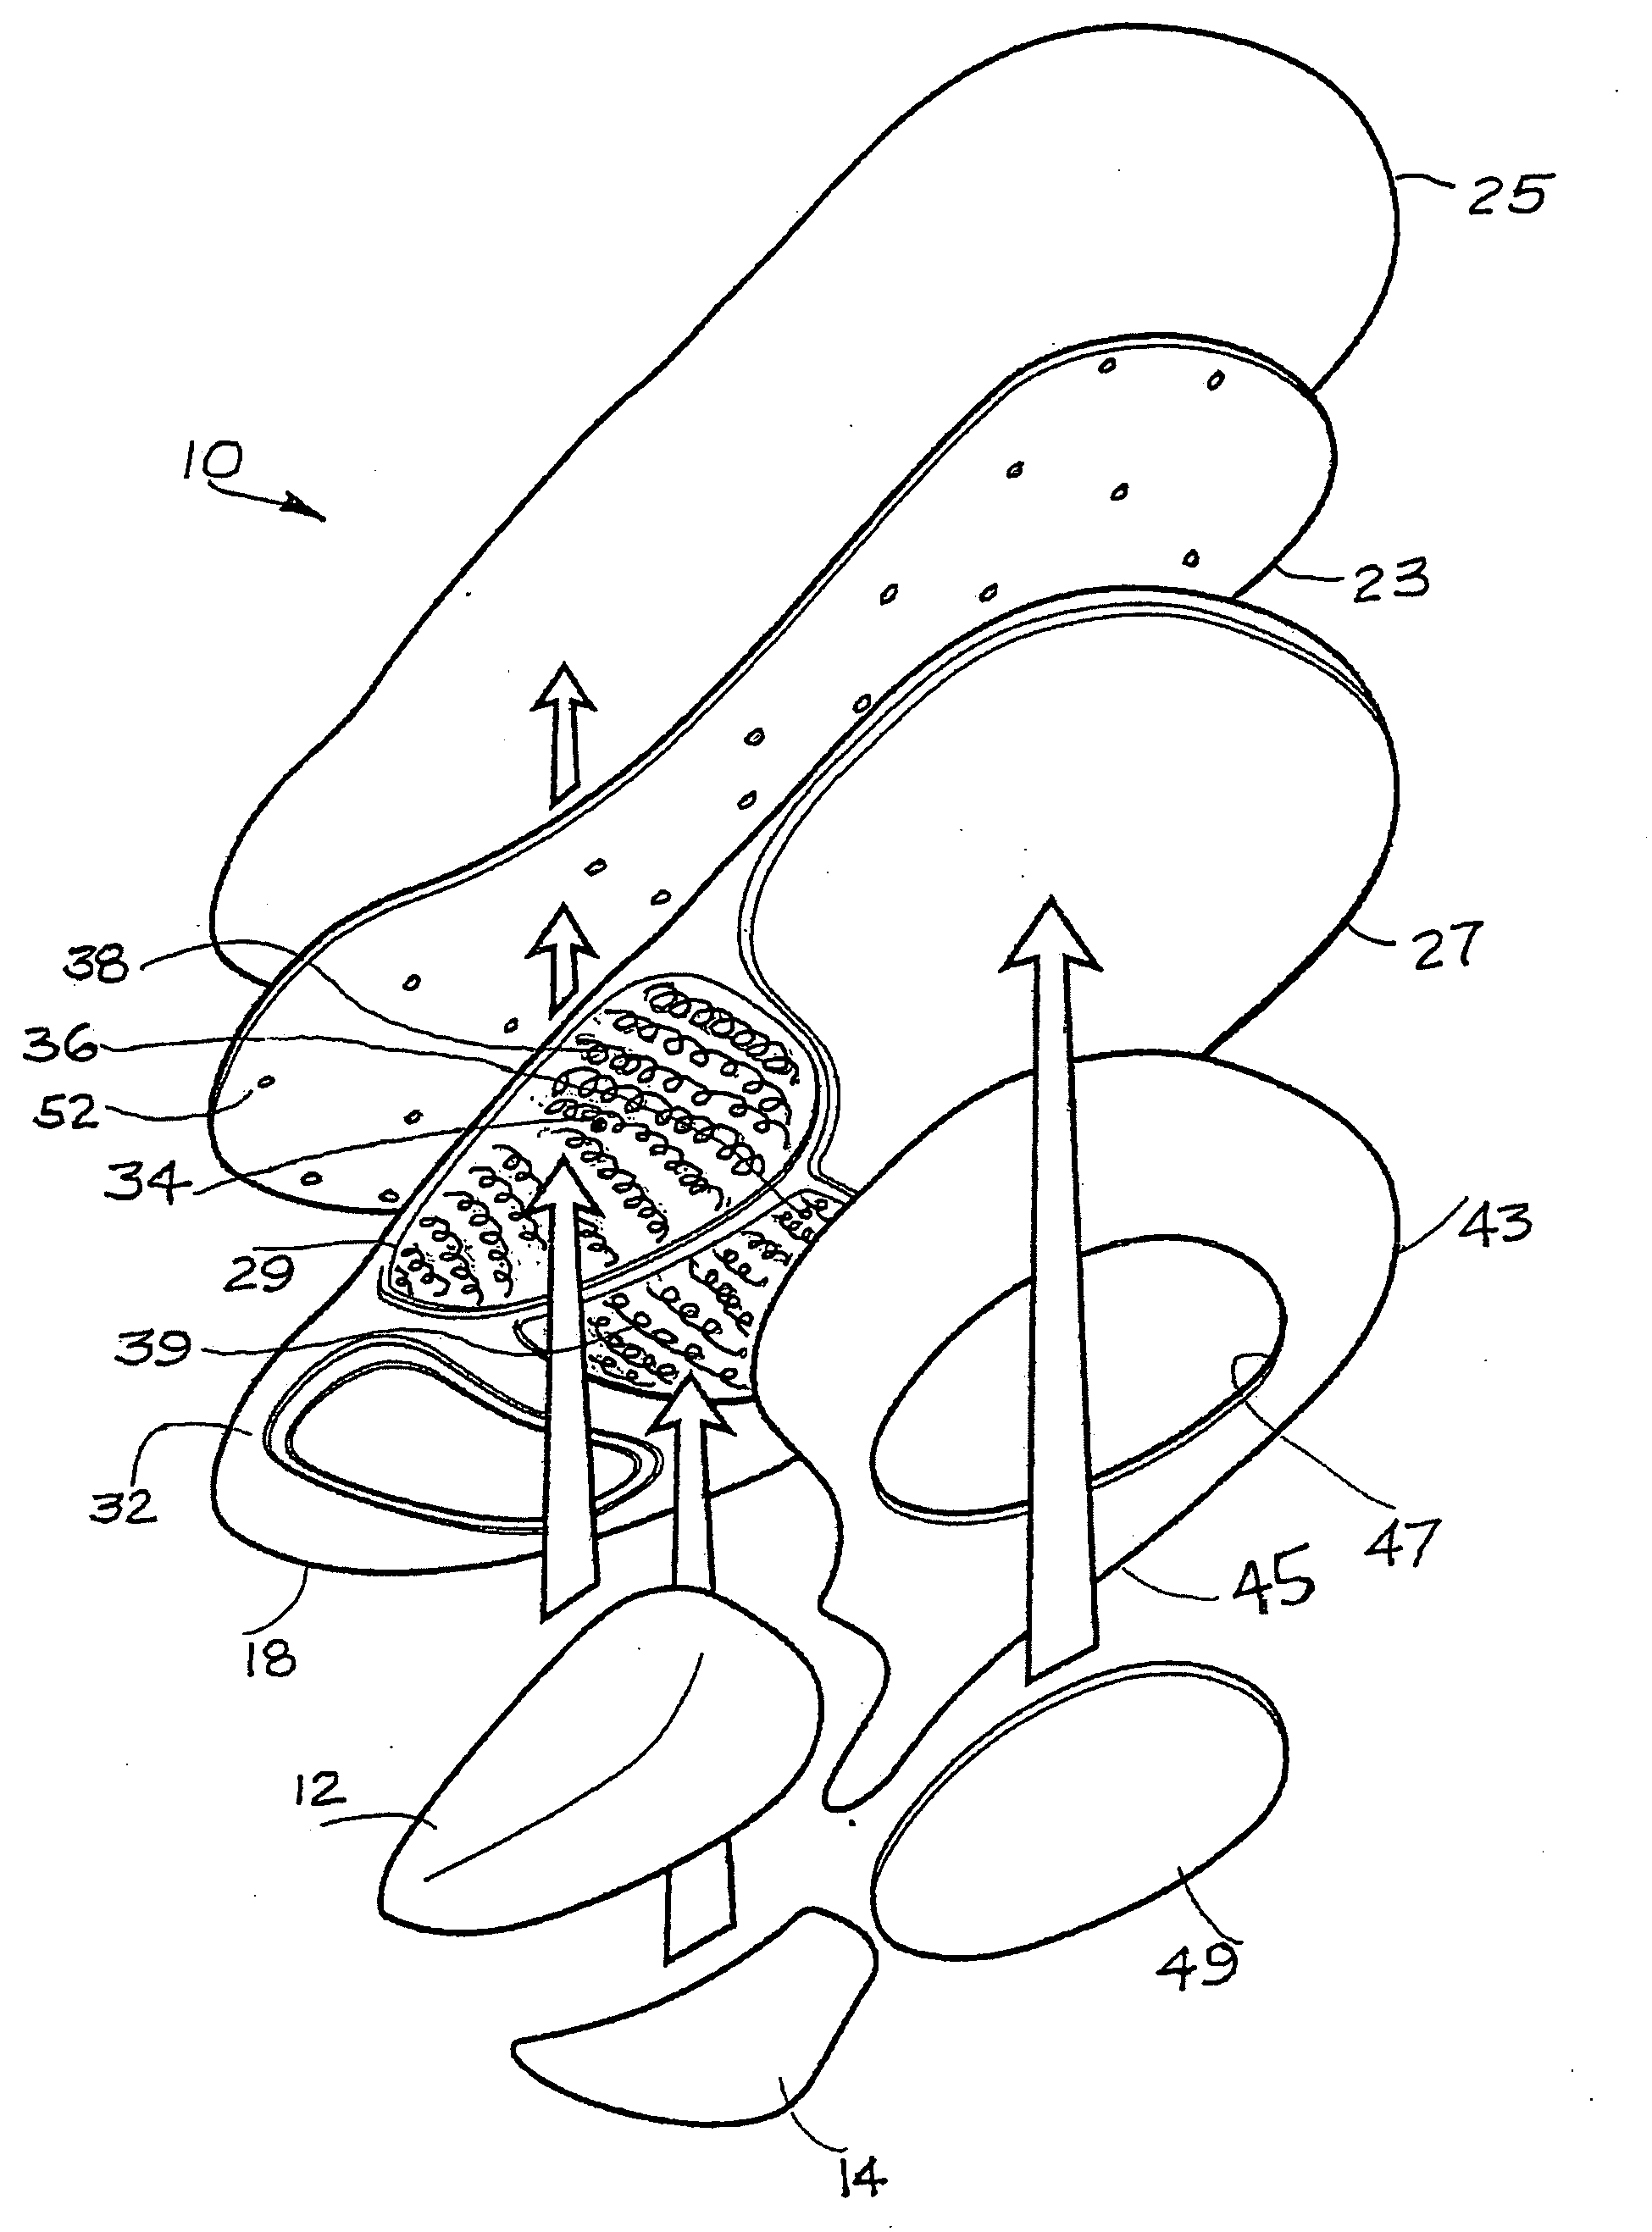 Orthotic foot device with removable support components and method of making same